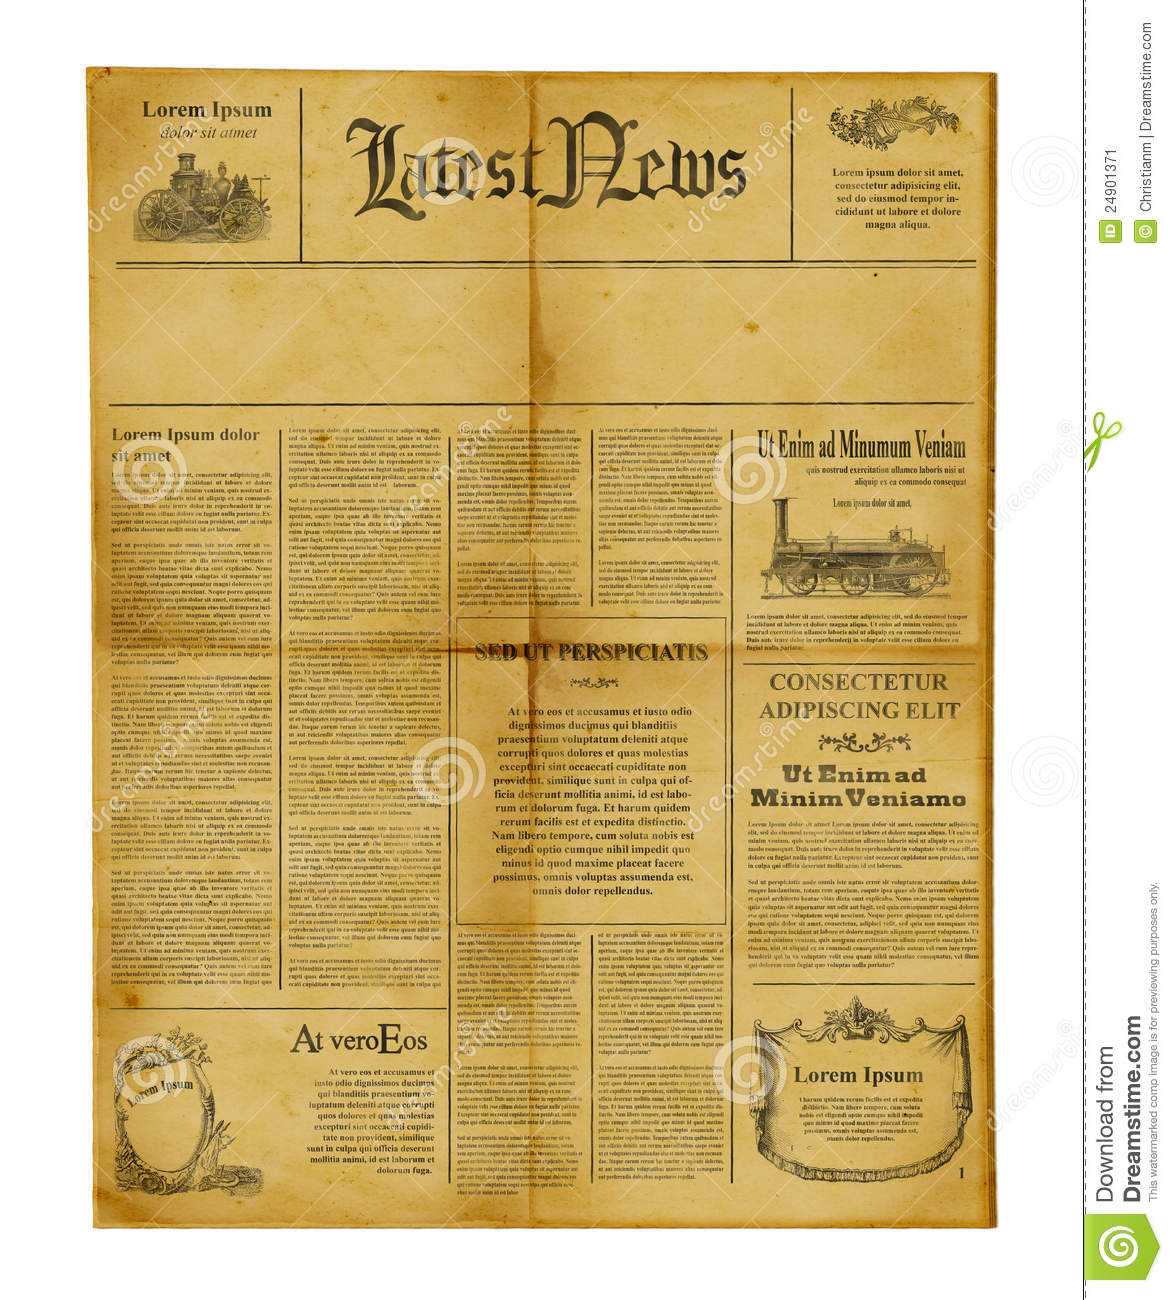 Antique Newspaper Template Stock Image. Image Of News – 24901371 With Old Blank Newspaper Template